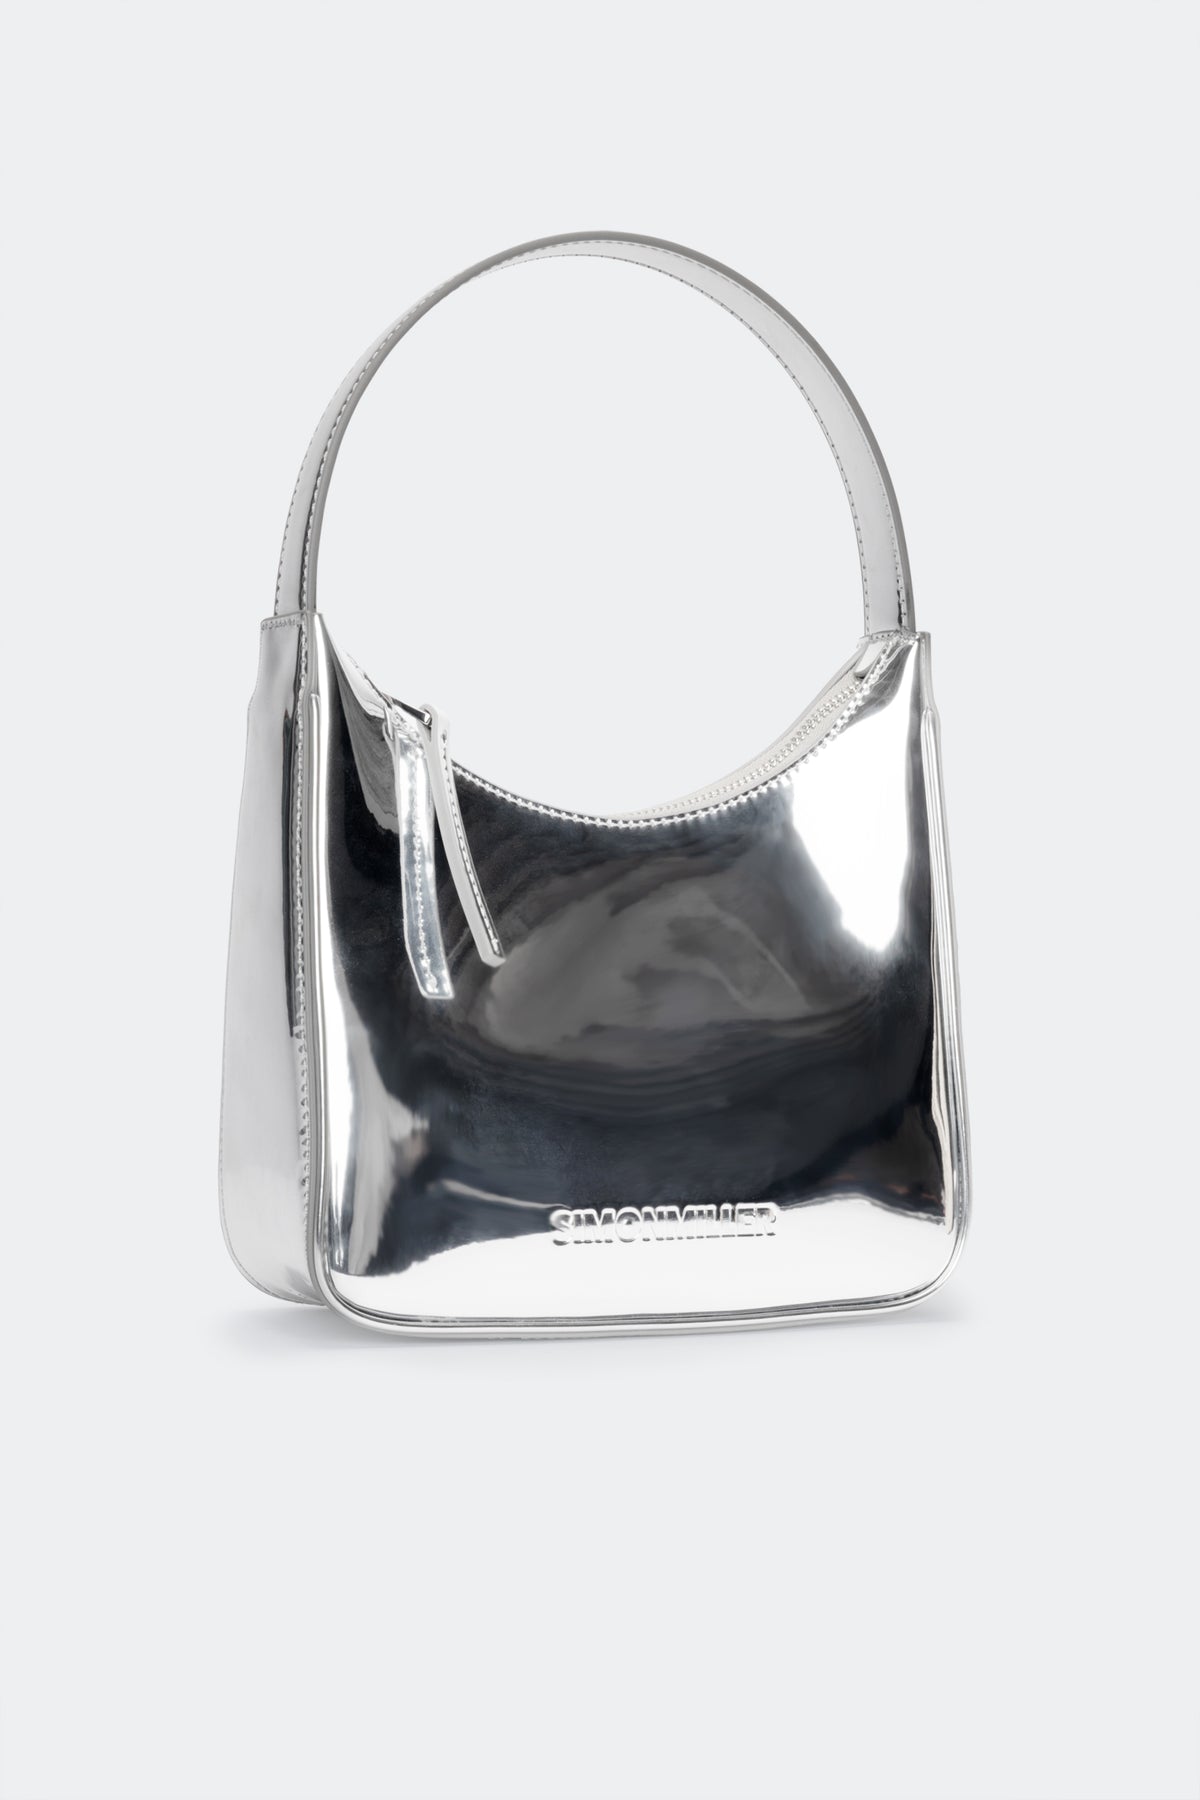 Snap Bag in Silver